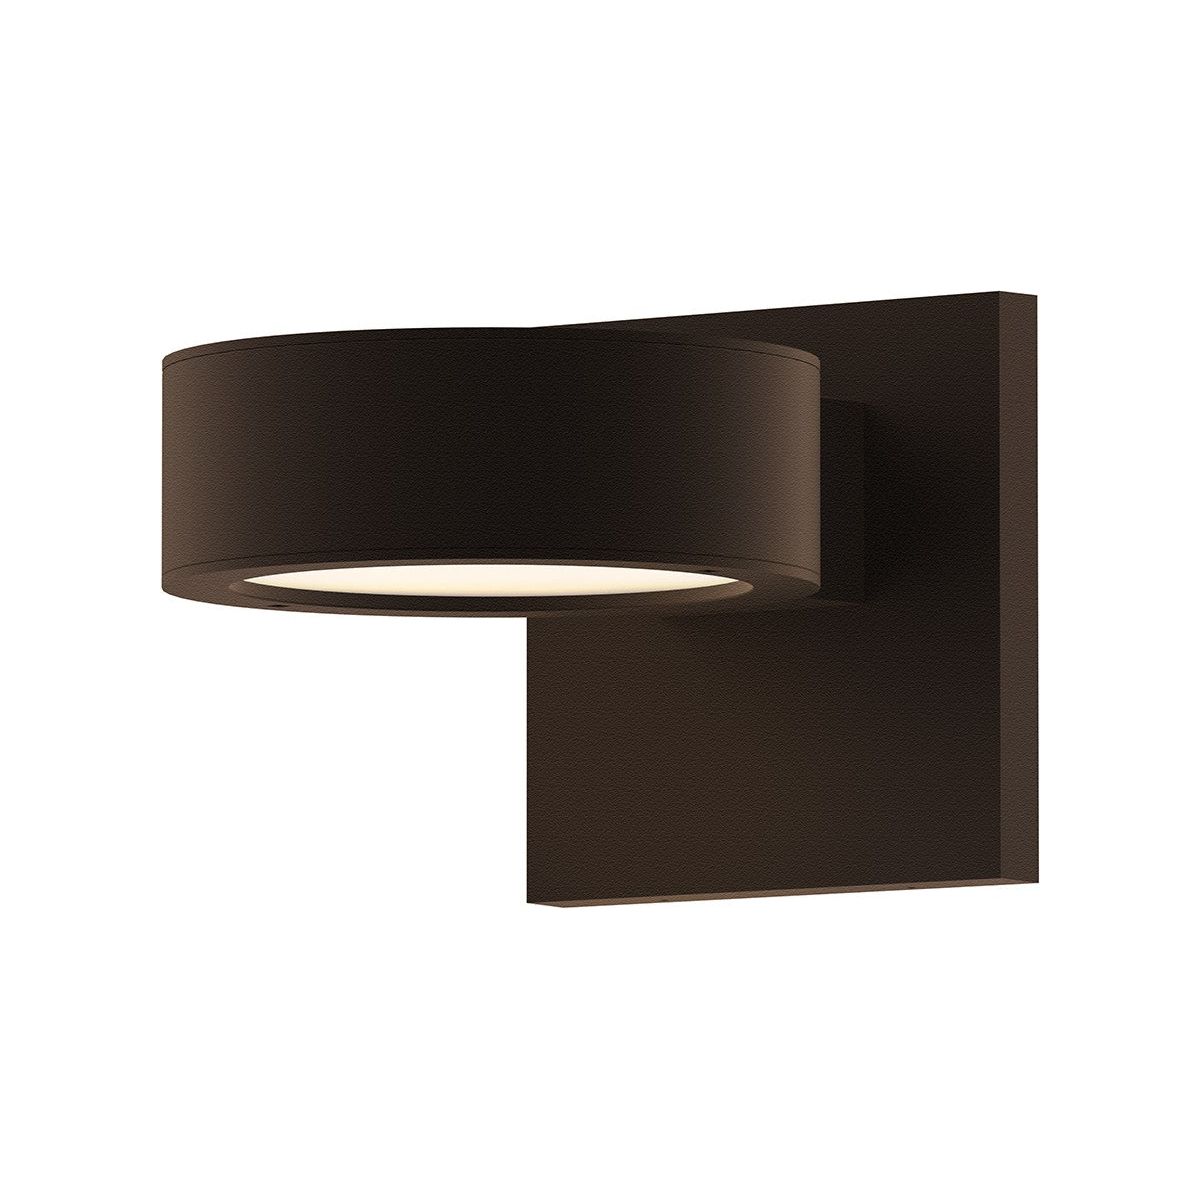 REALS Up/Down LED Sconce with Plate Lenses